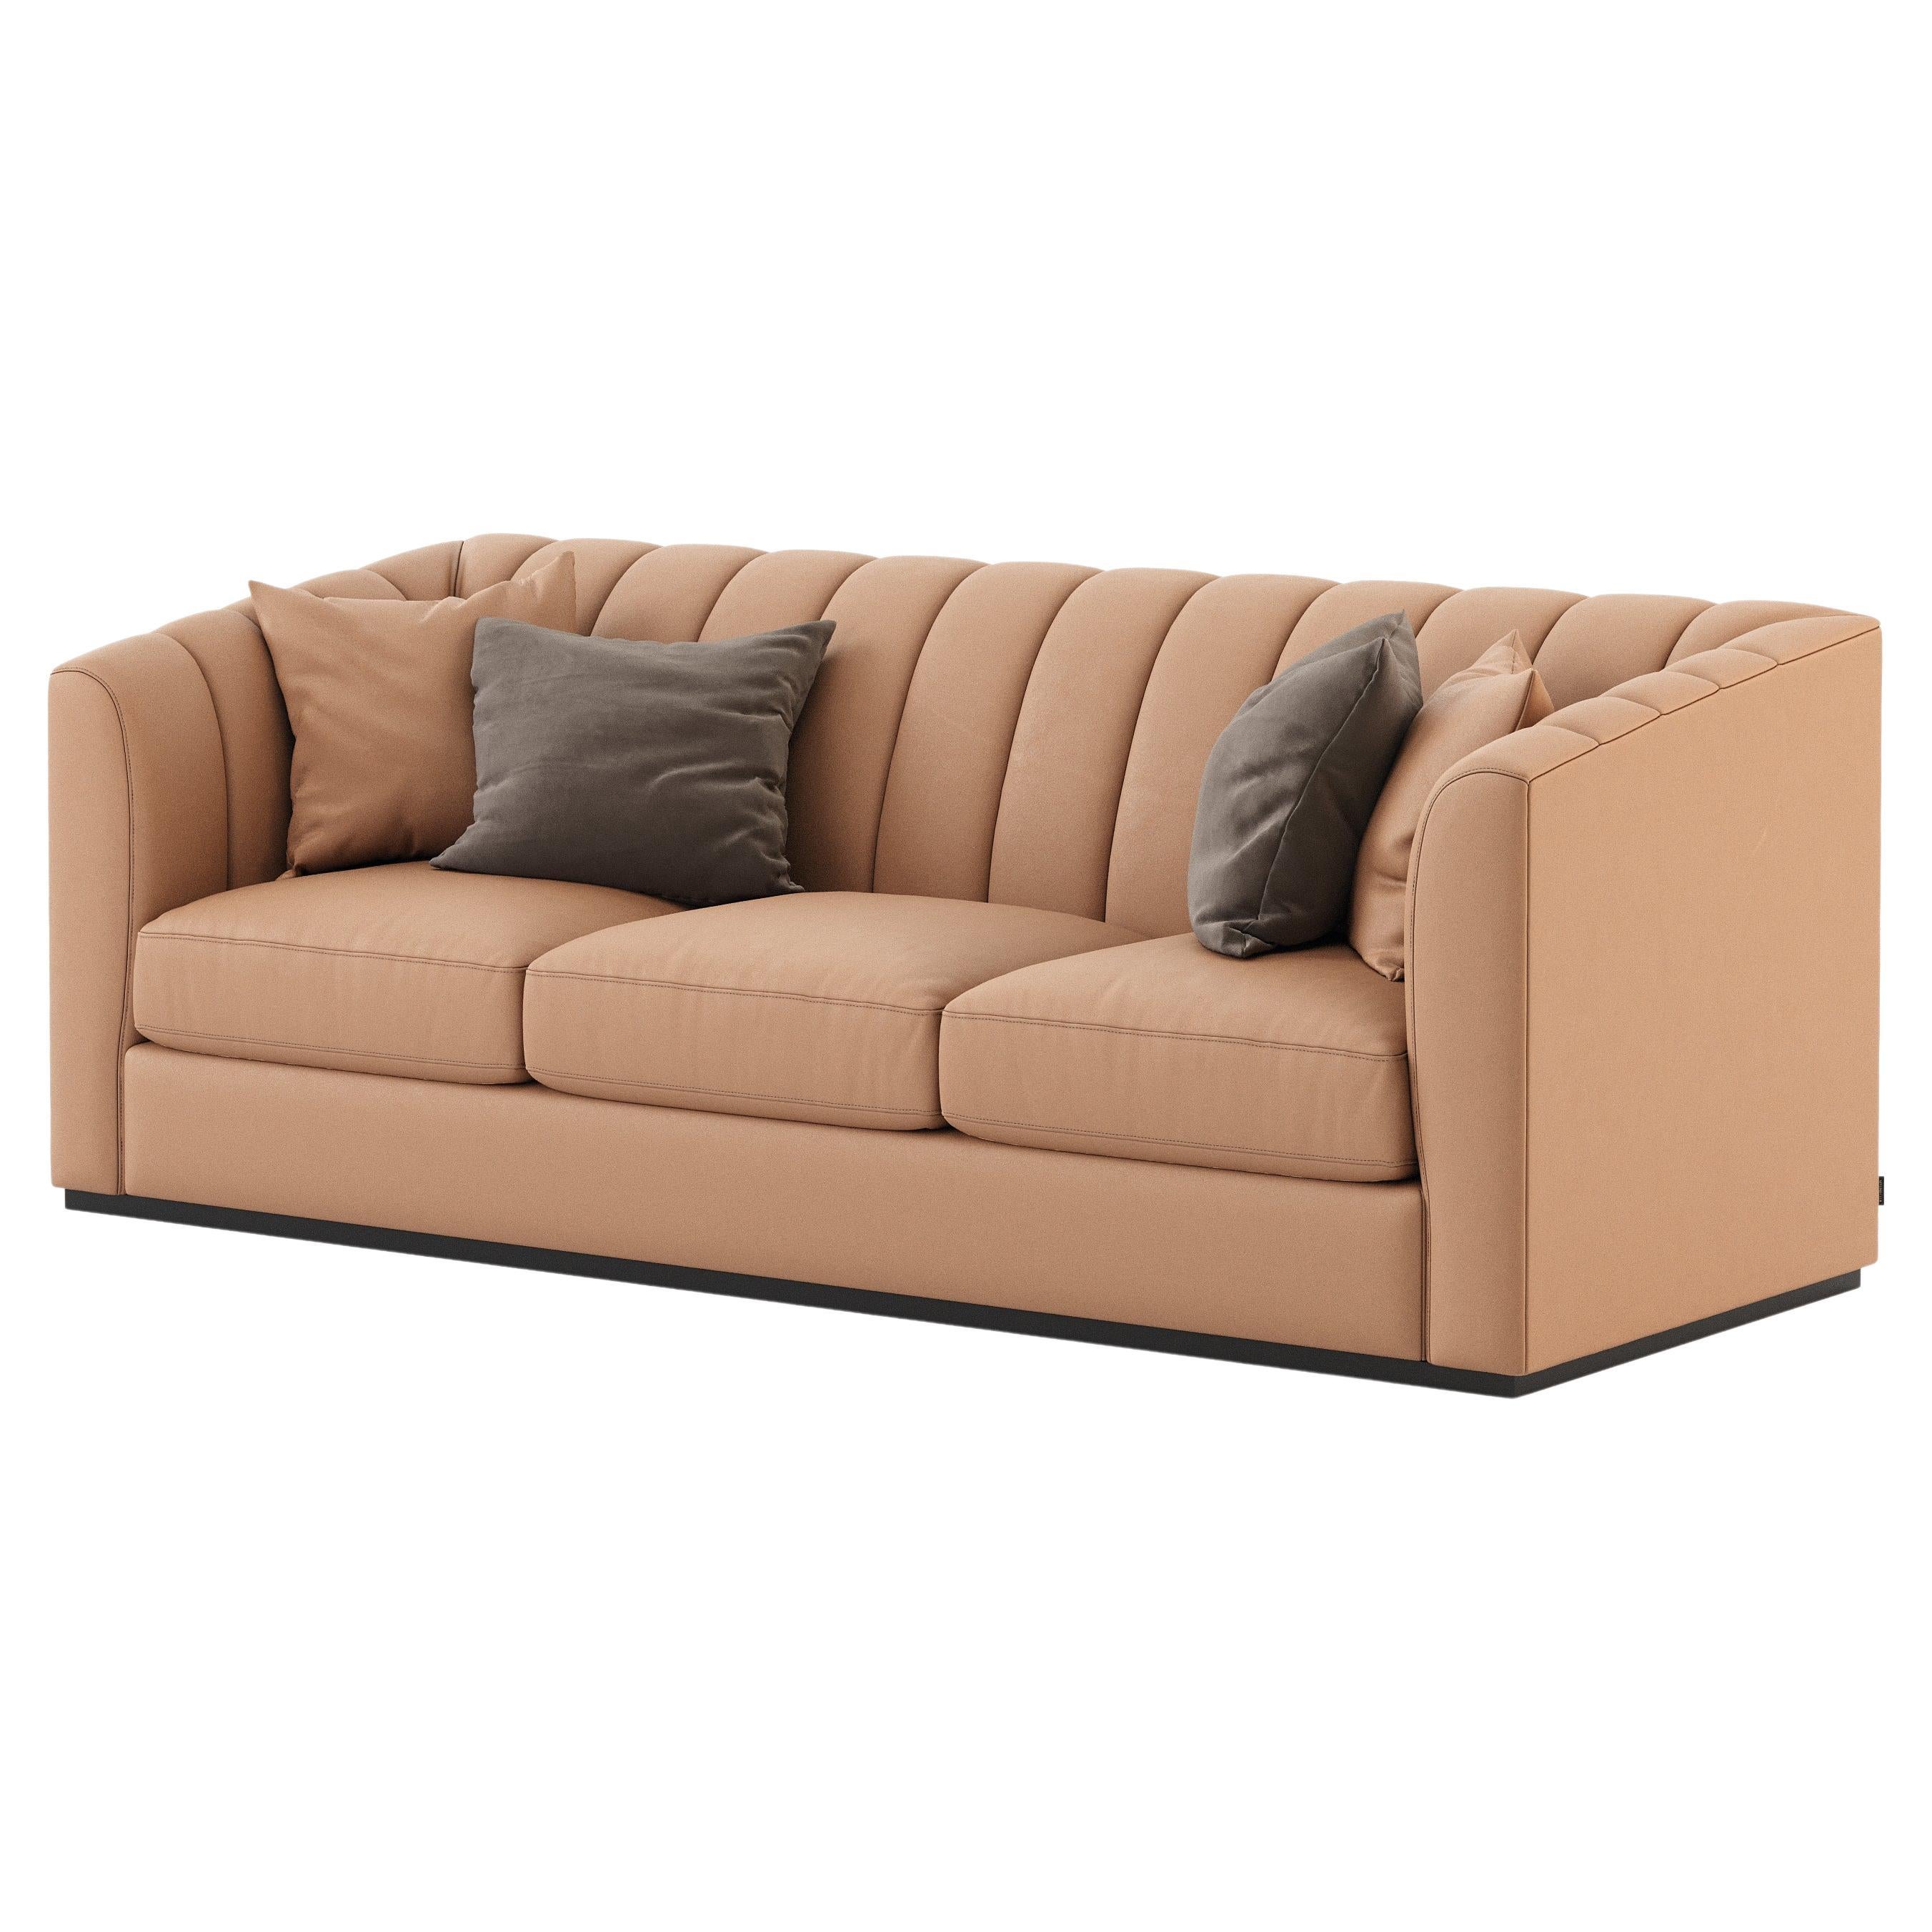 Modern 3 Seats Club Sofa Made with Wood and Leather, Handmade by Stylish Club For Sale